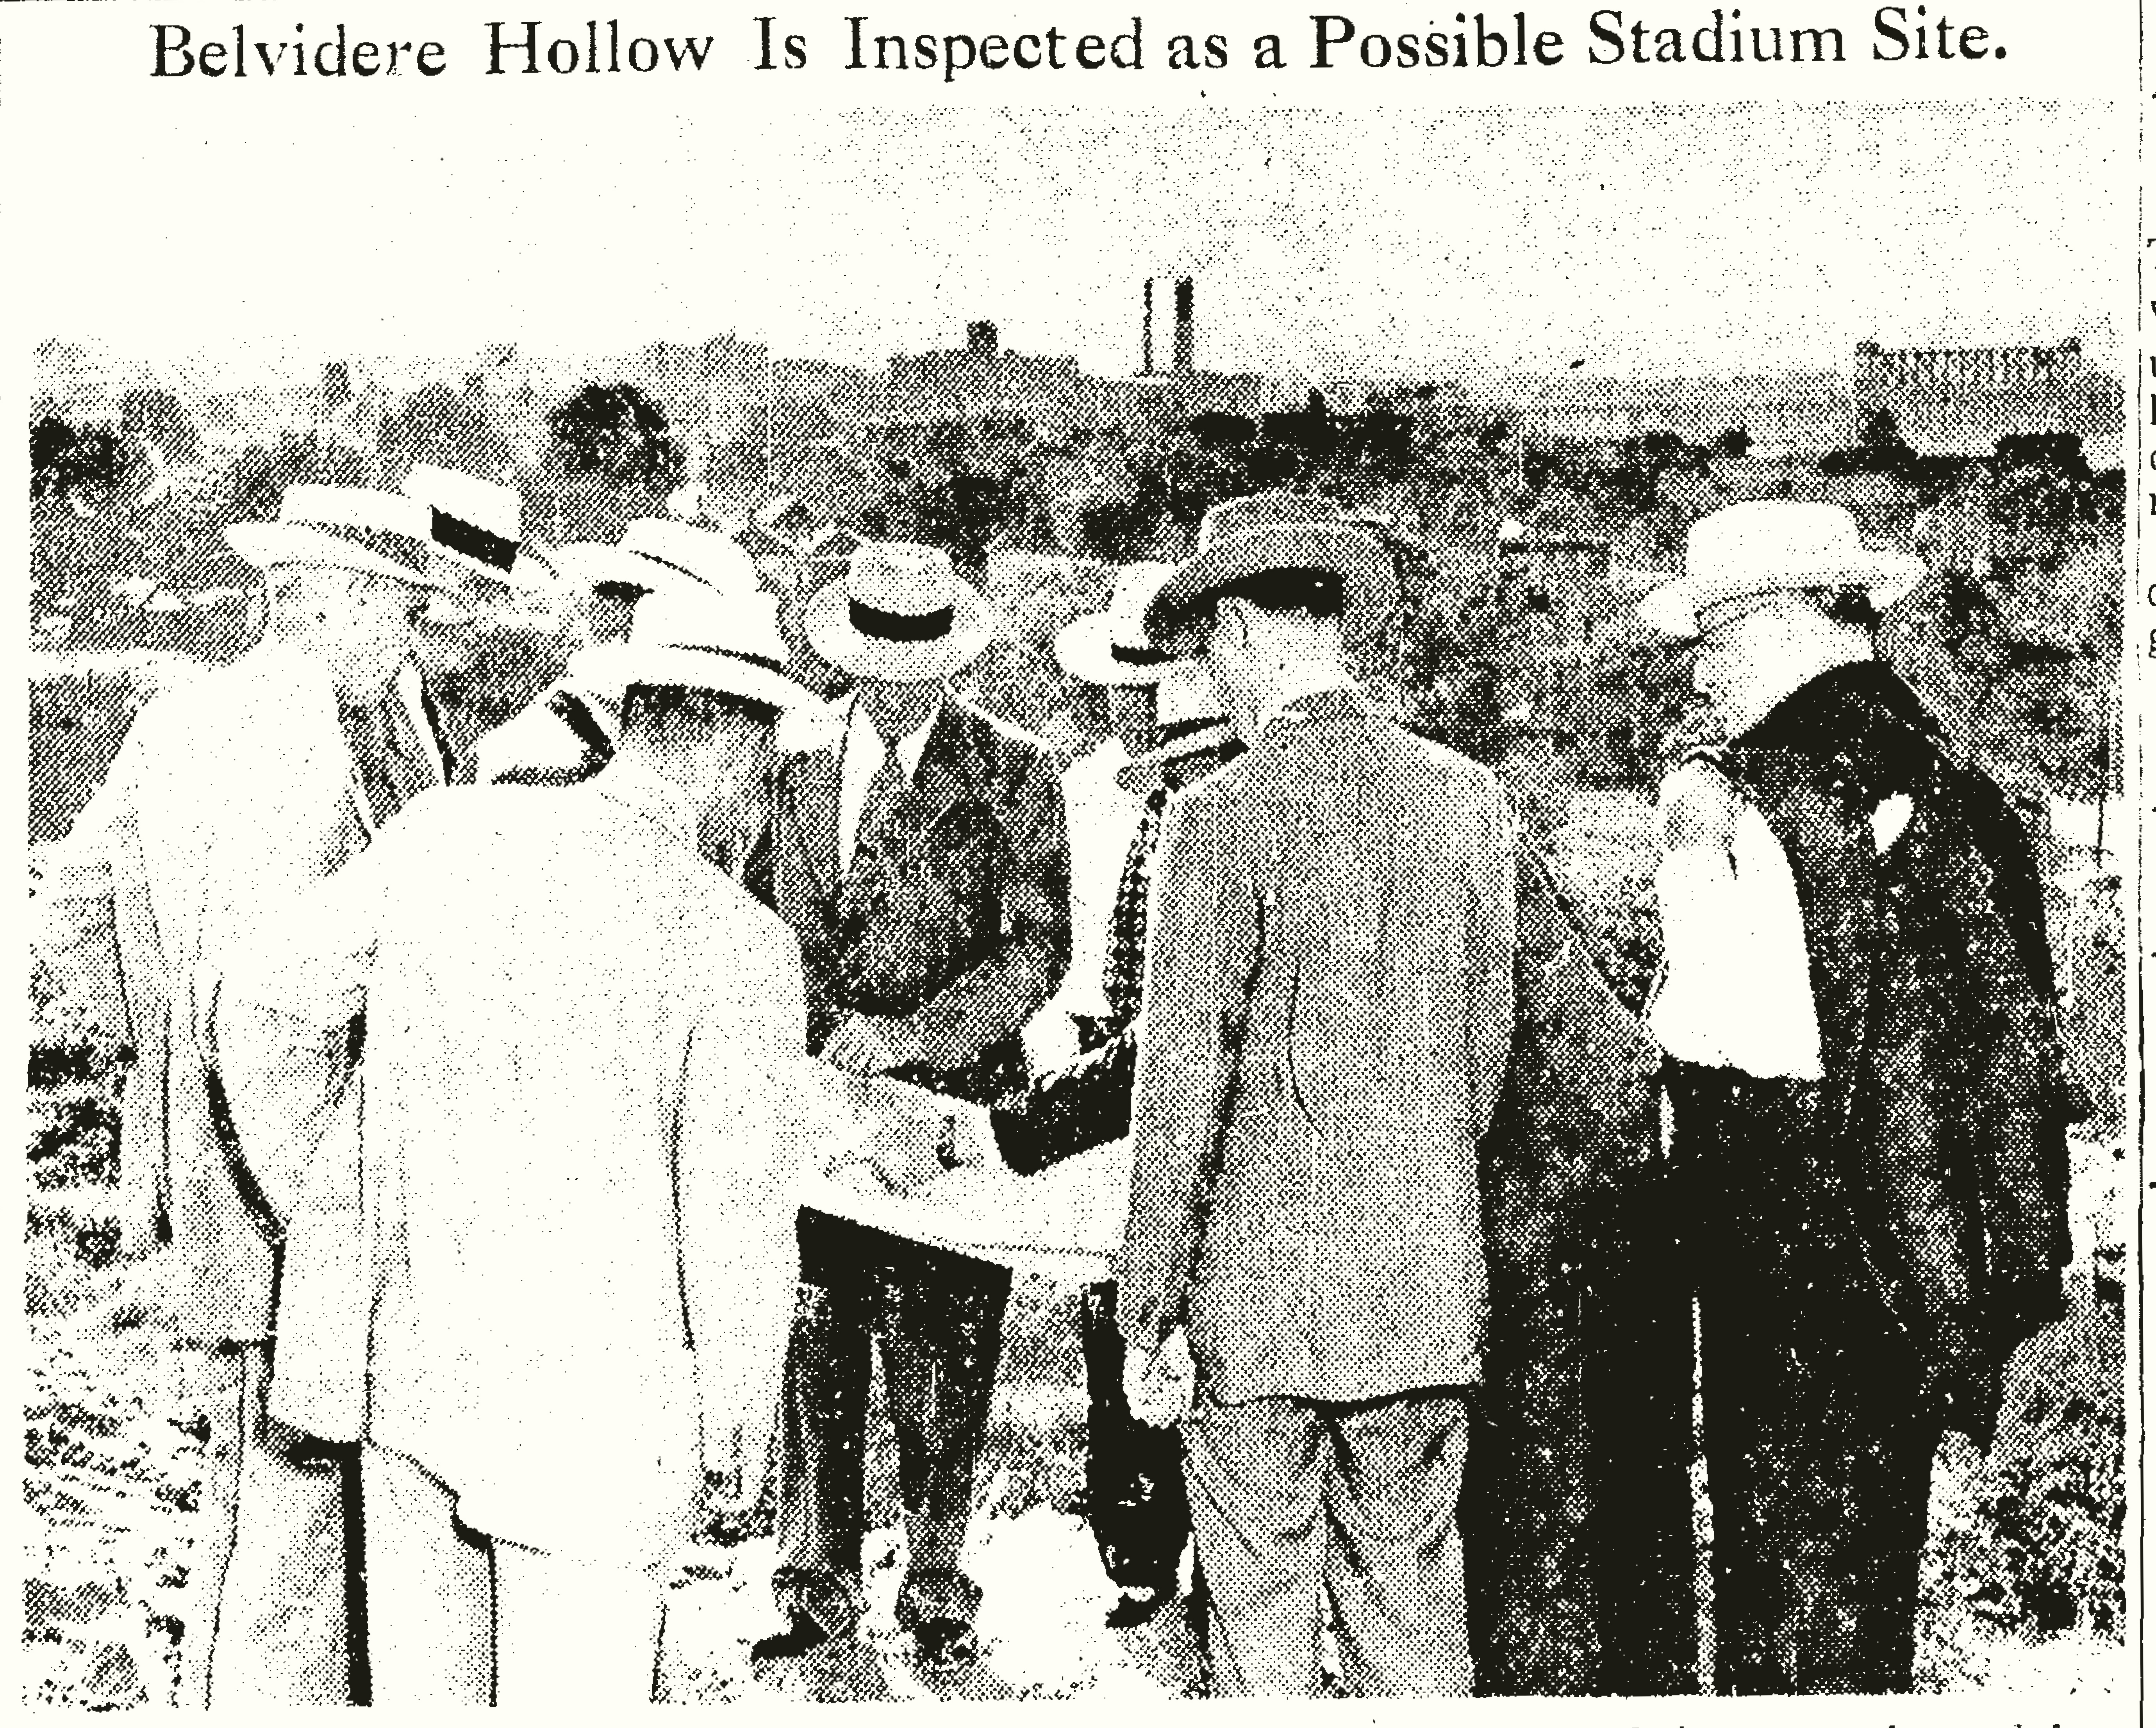 City officials examining Belvidere Hollow as a possible stadium site in 1950. THE KANSAS CITY STAR